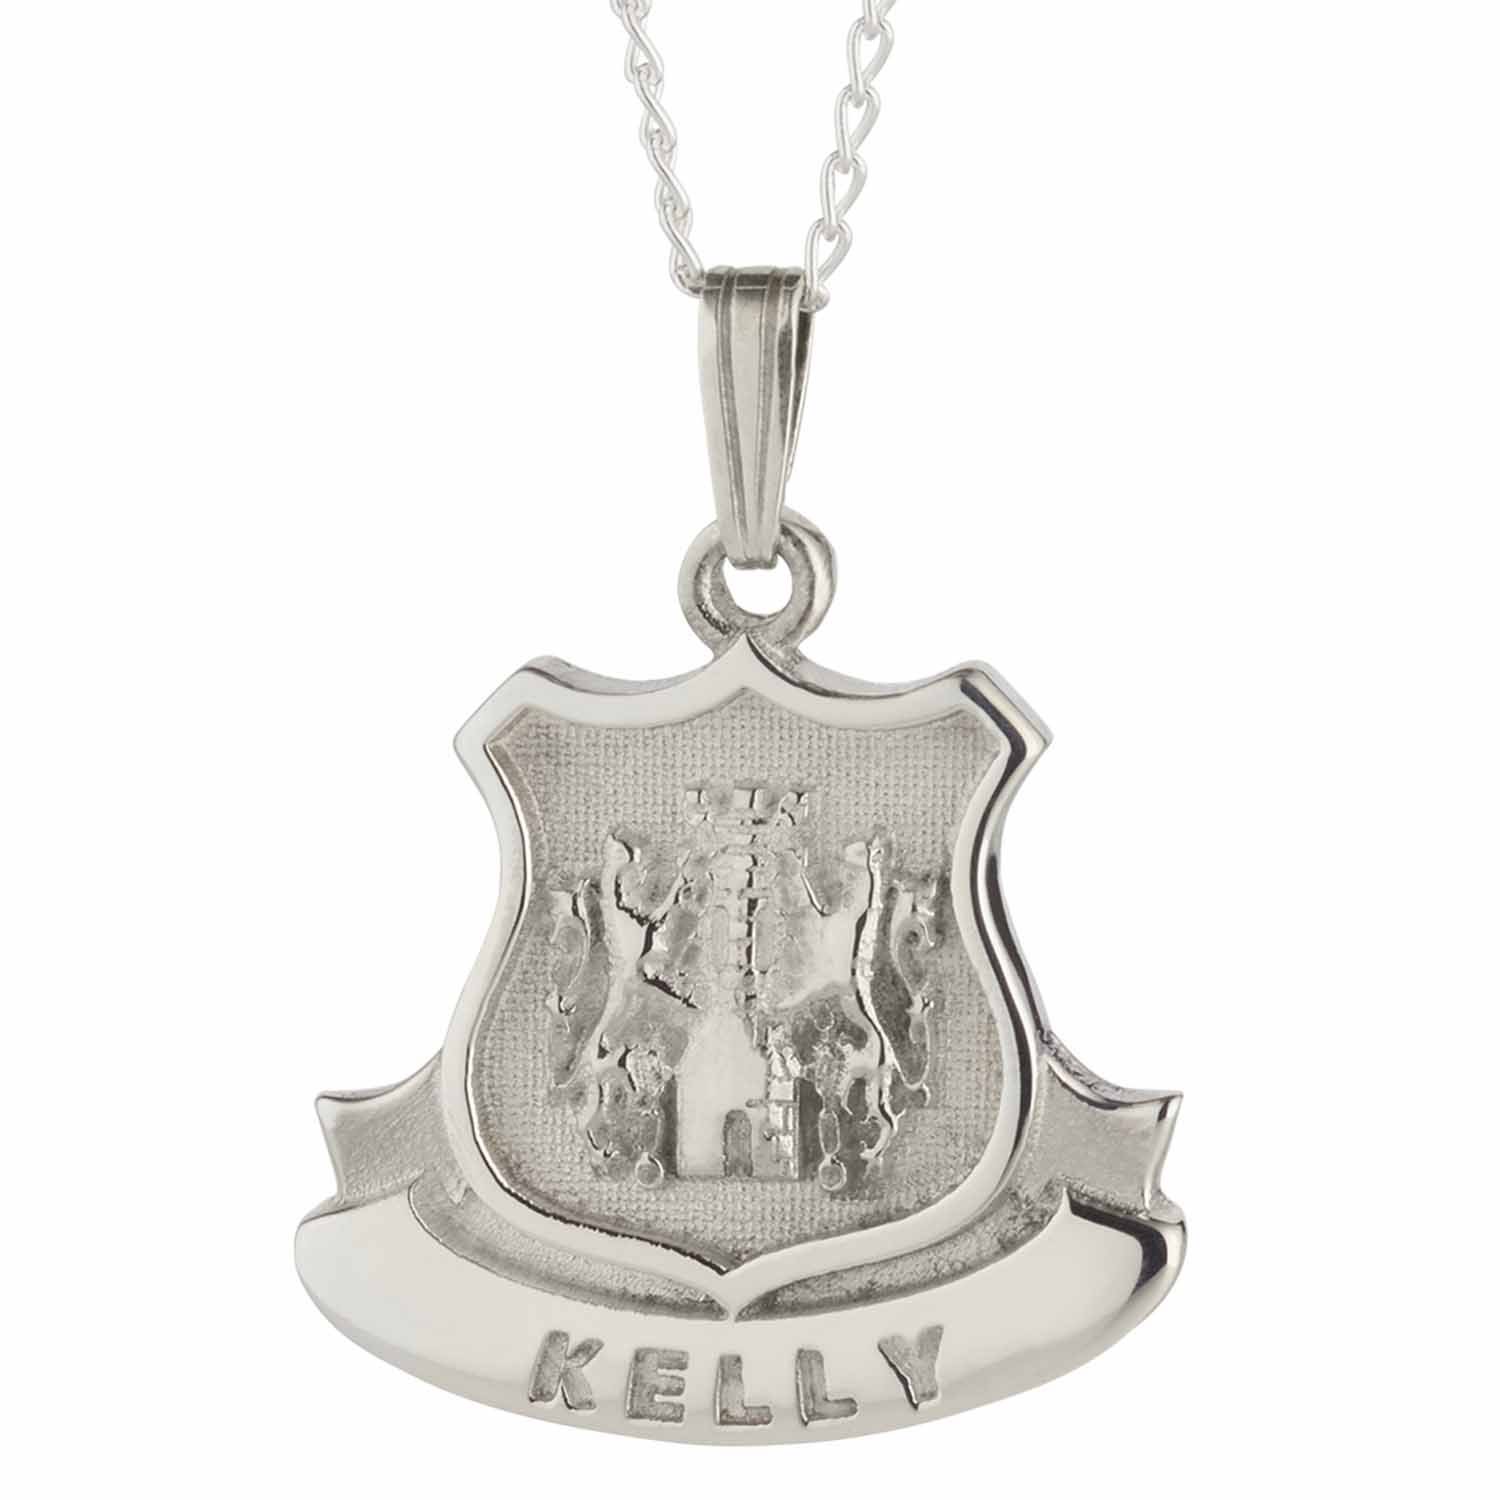 Product image for Irish Necklace - Sterling Silver Personalized Coat of Arms Shield Pendant